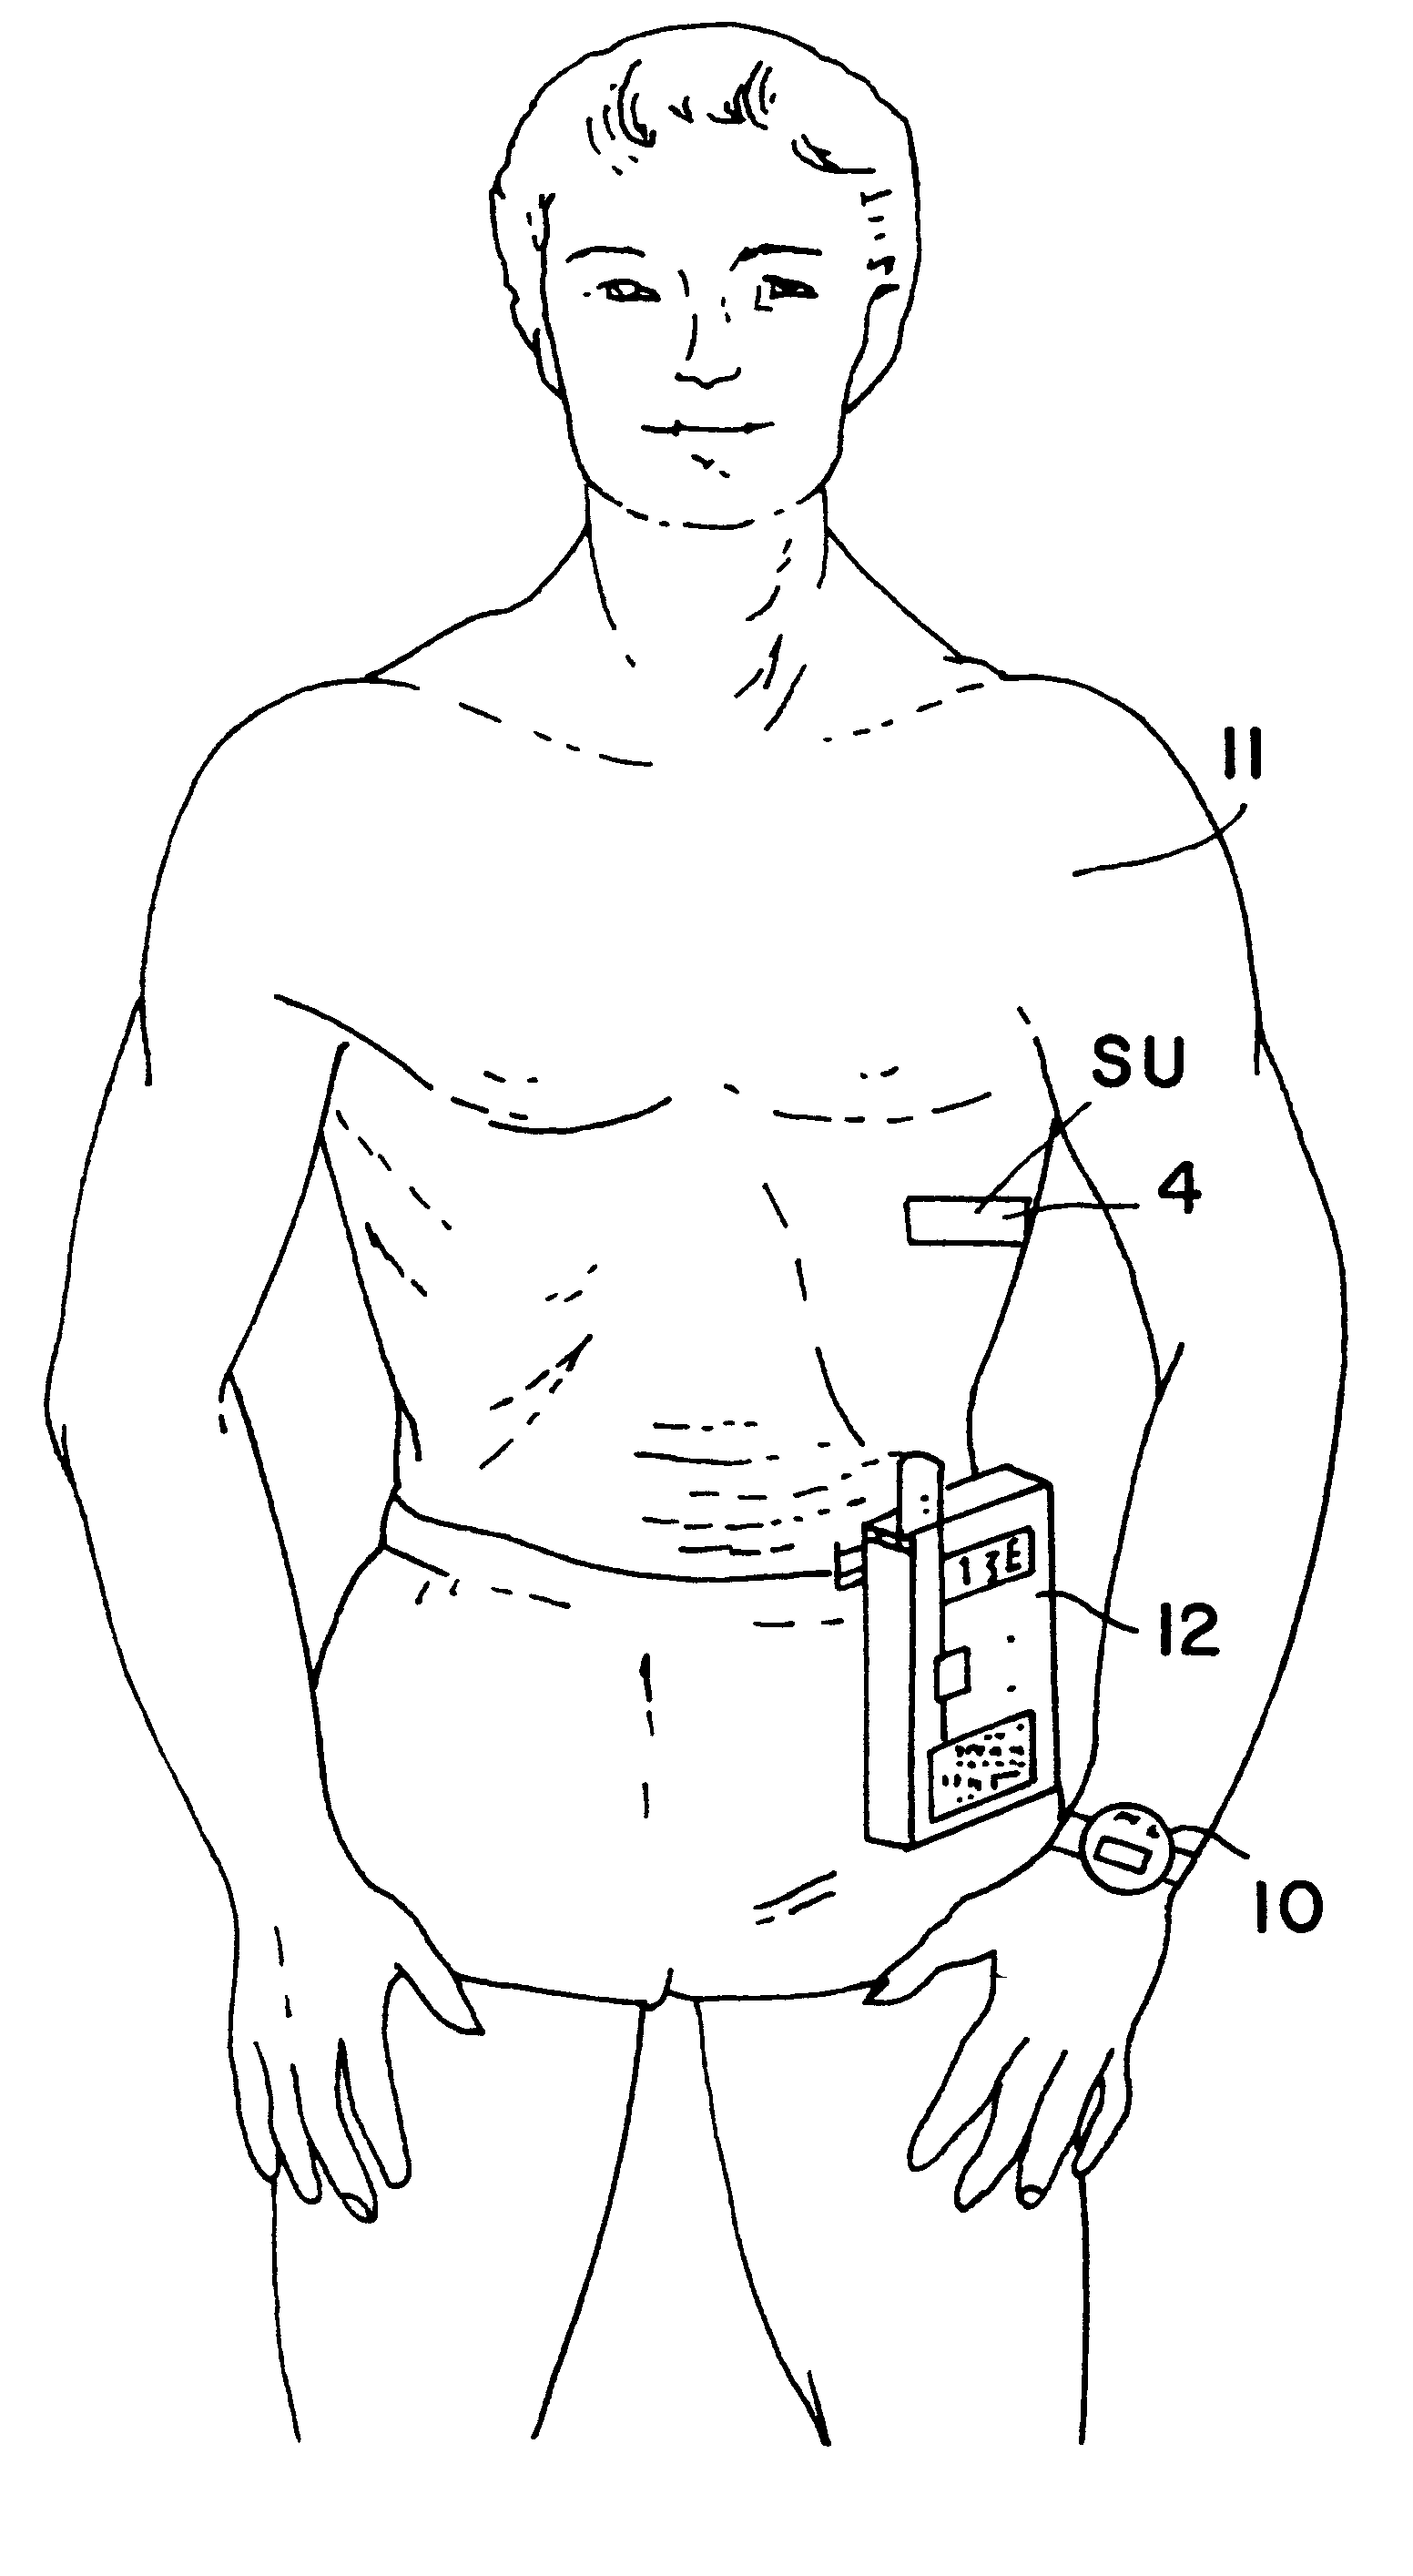 System for long-term remote medical monitoring